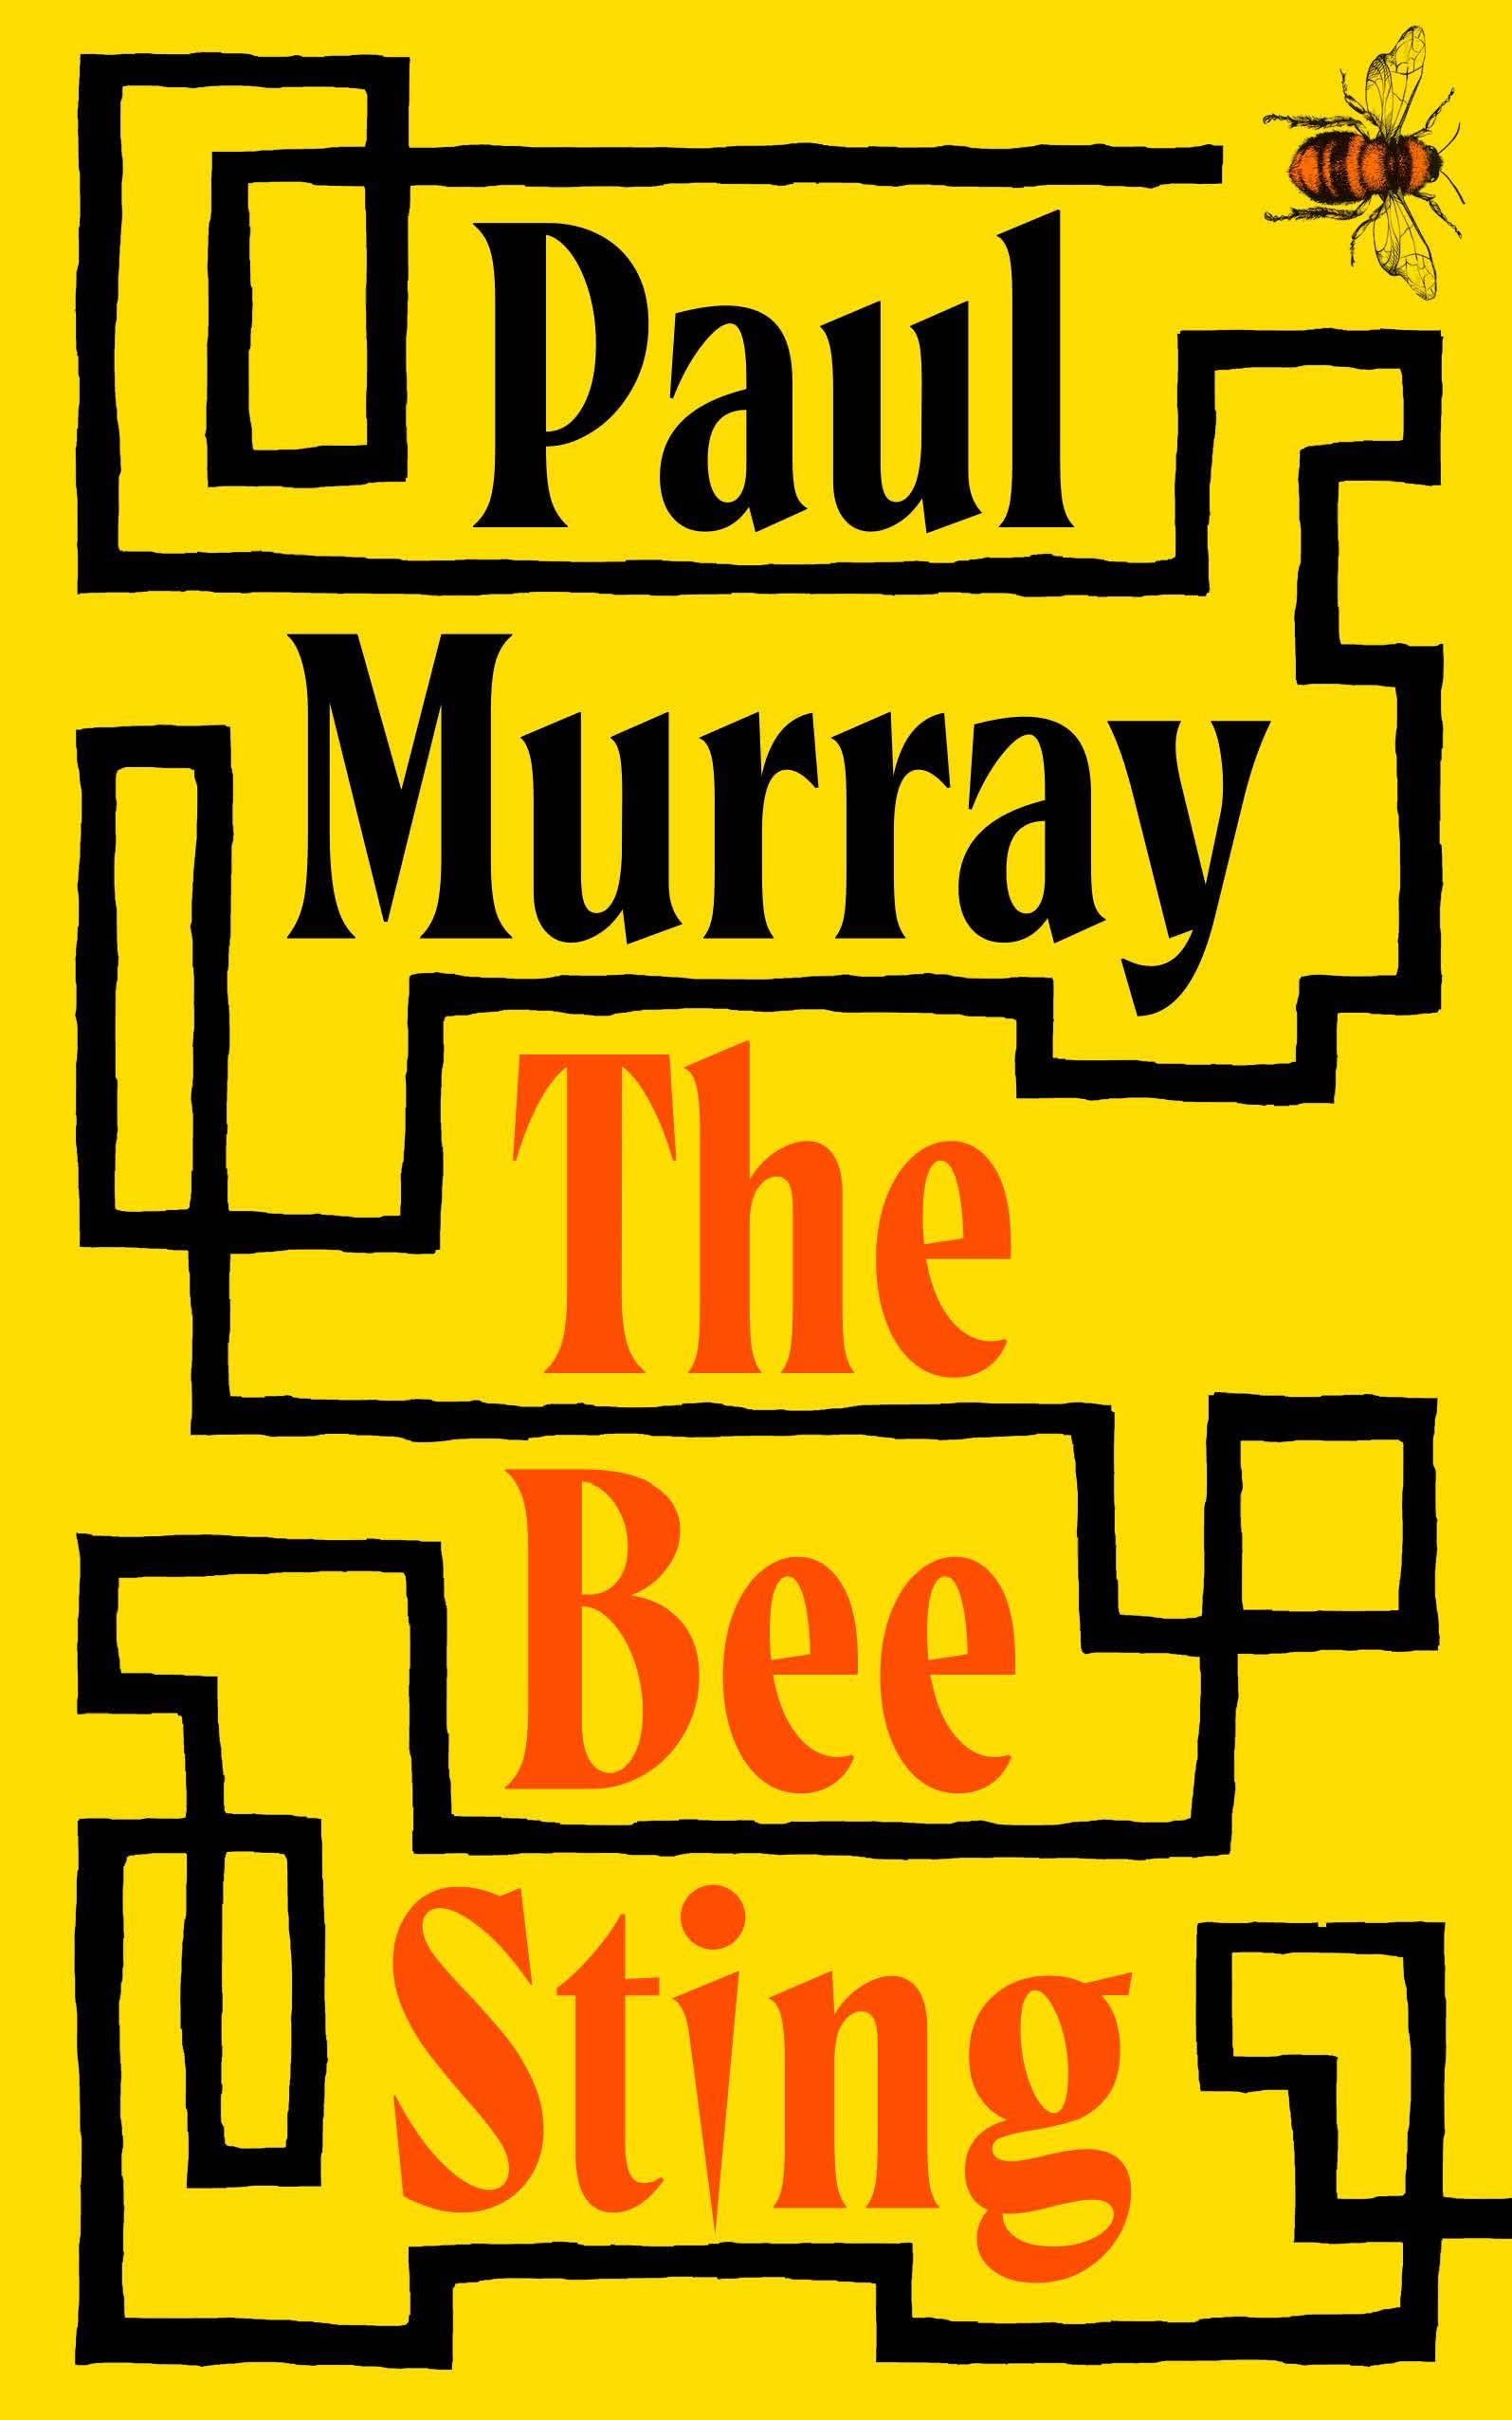 Paul_Murray_The_Bee_Sting book cover